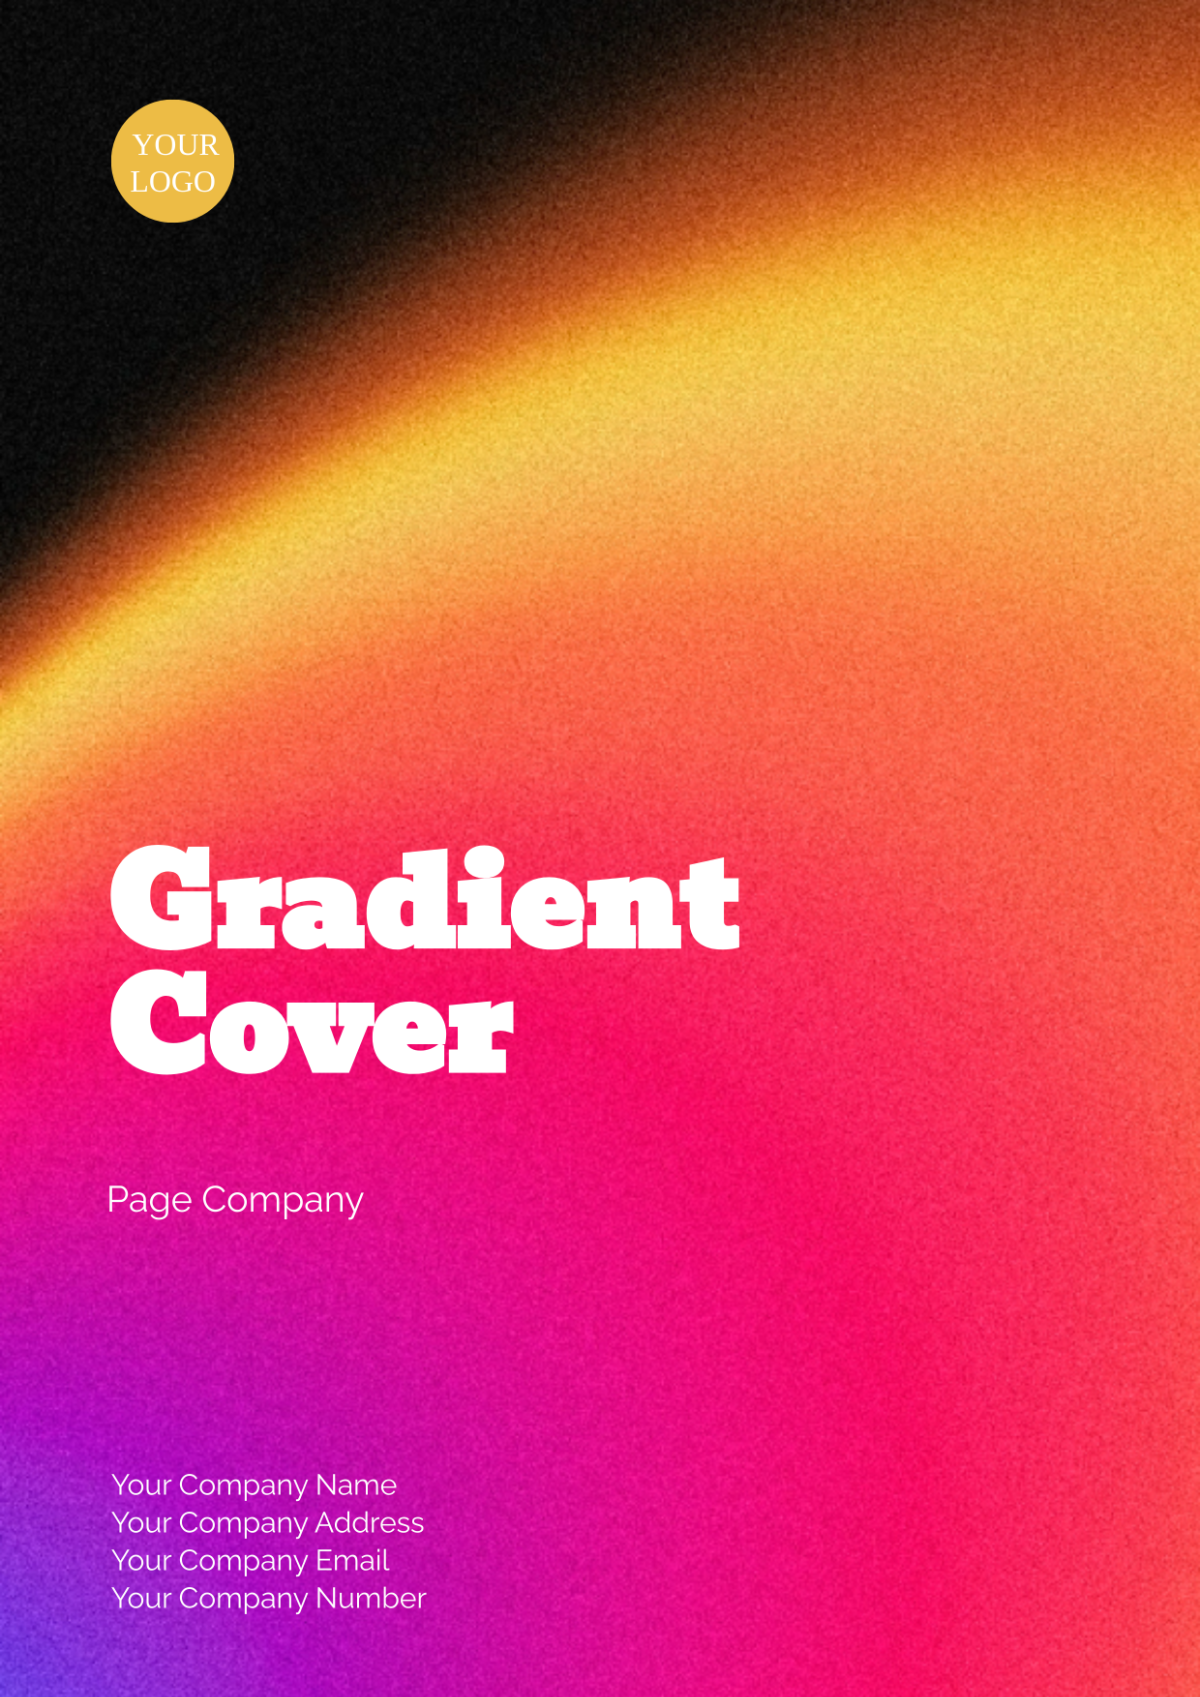 Gradient Cover Page Company